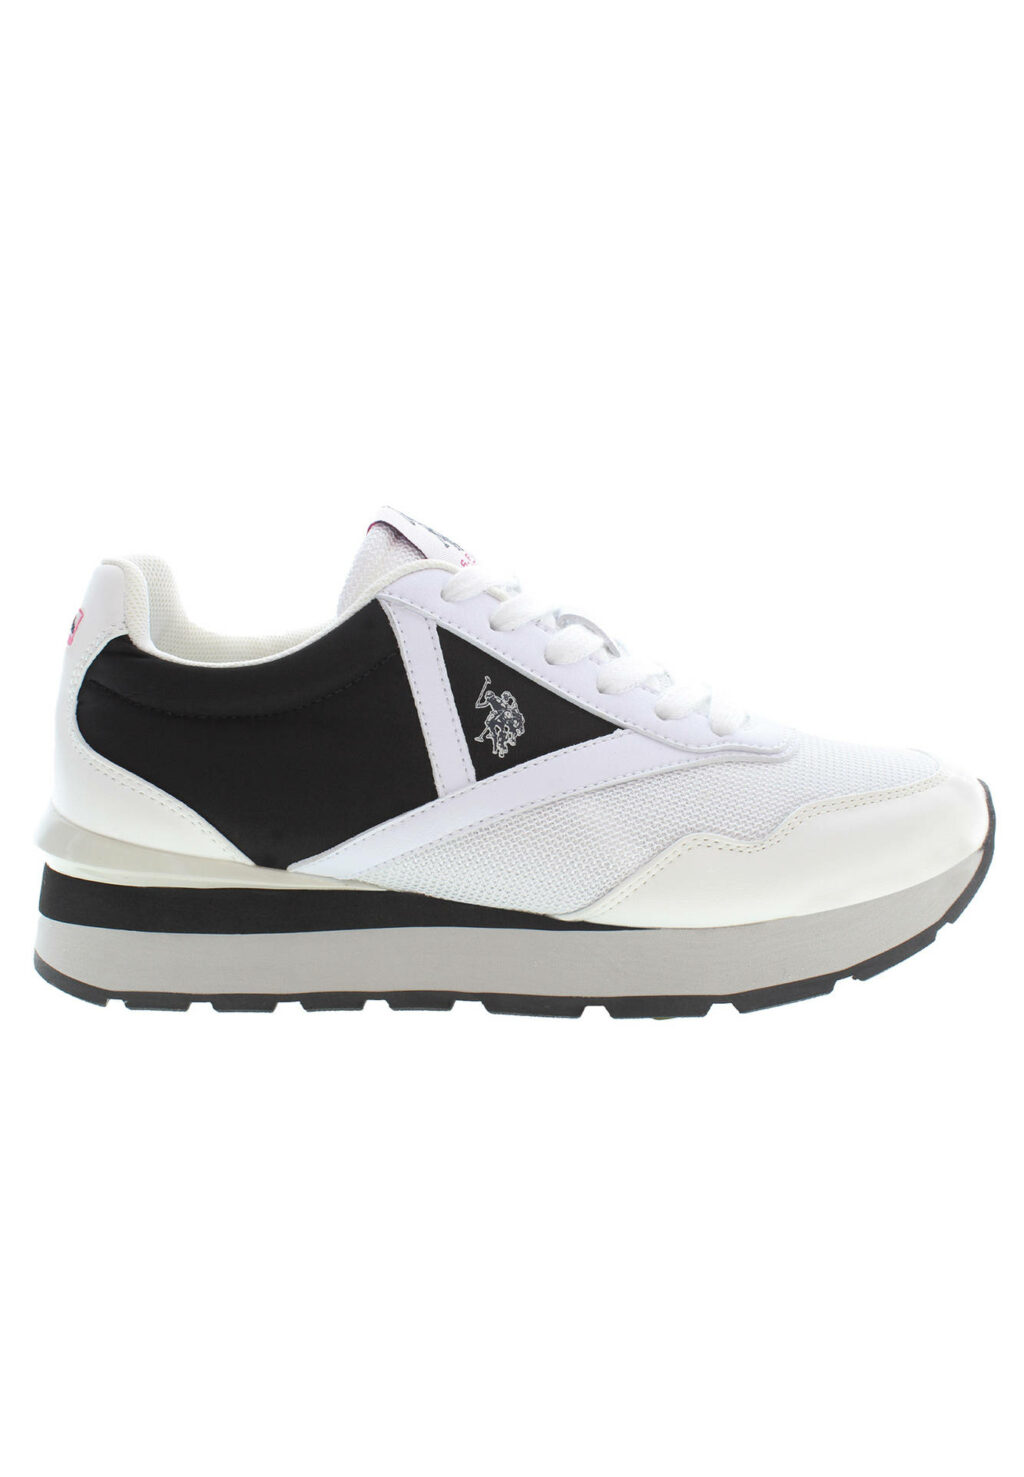 US POLO BEST PRICE WHITE WOMEN'S SPORT SHOES TABY001W3TY1_BIANCO_BLK-WHI01